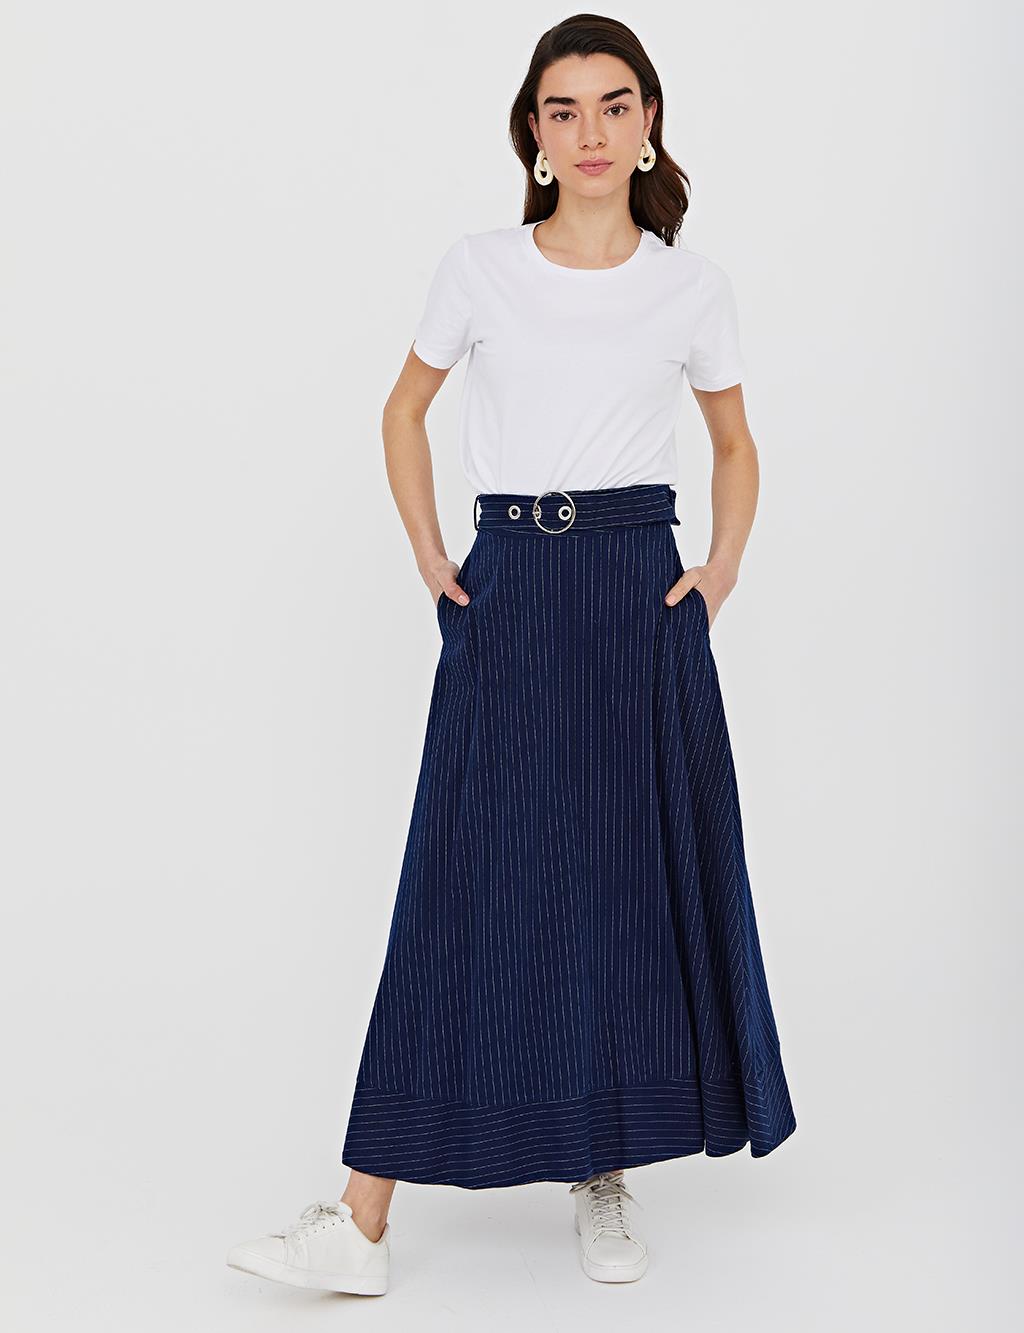 Belted Striped A-line Skirt B21 12006 Navy